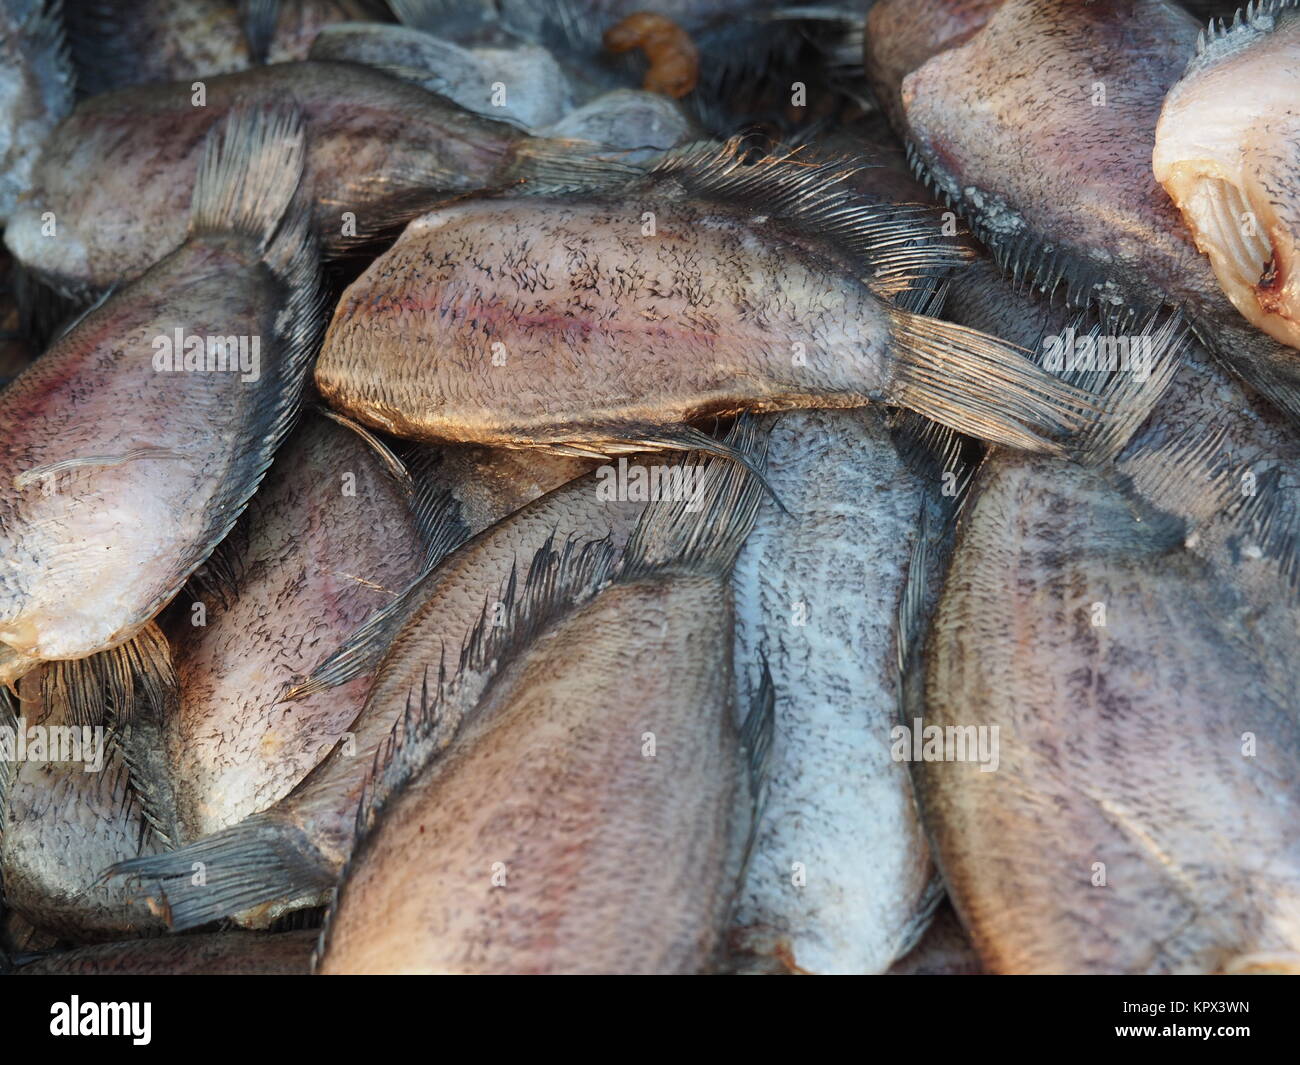 Dried Trichogaster Pectoralis Fish Stock Photo